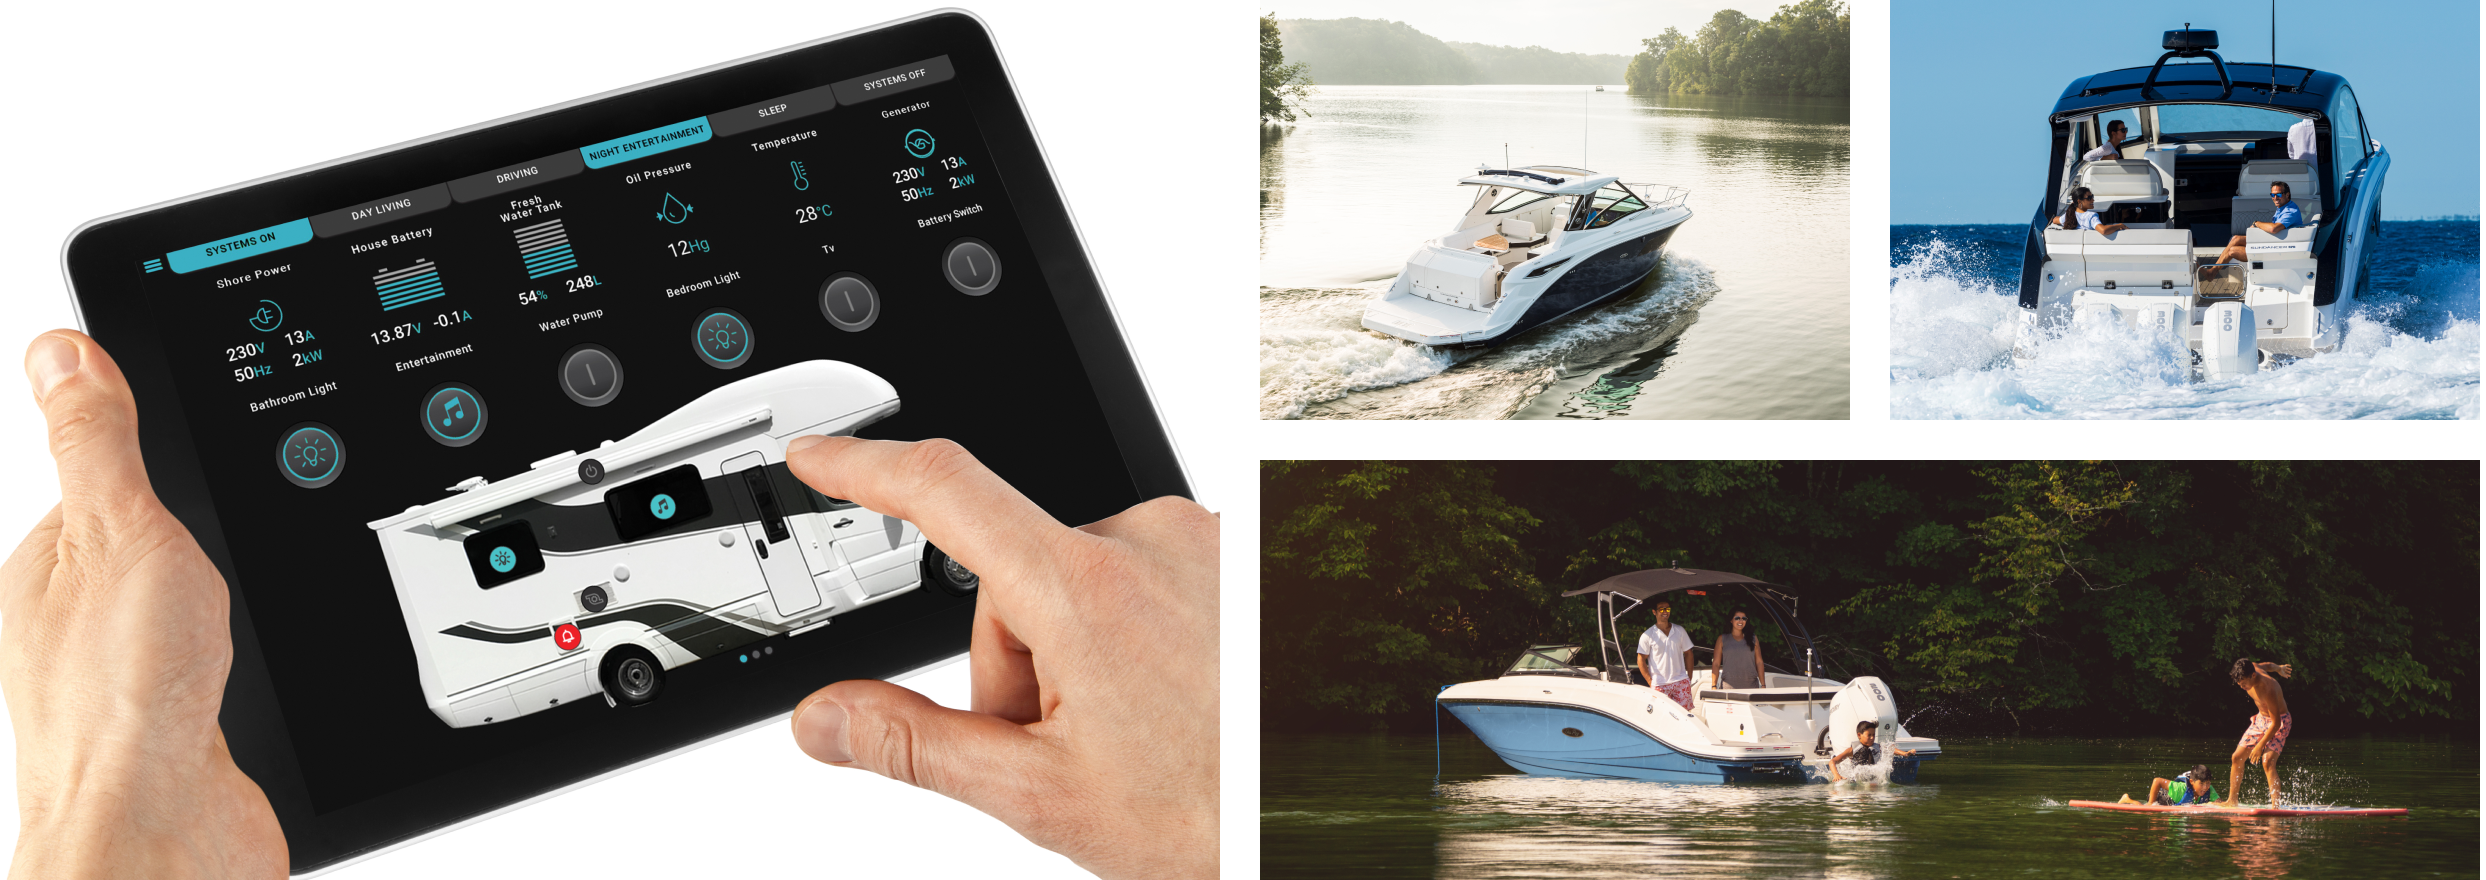 A person using a CZone® system.A boat navigating the water.People on a boat on the water.People swimming next to a boat.